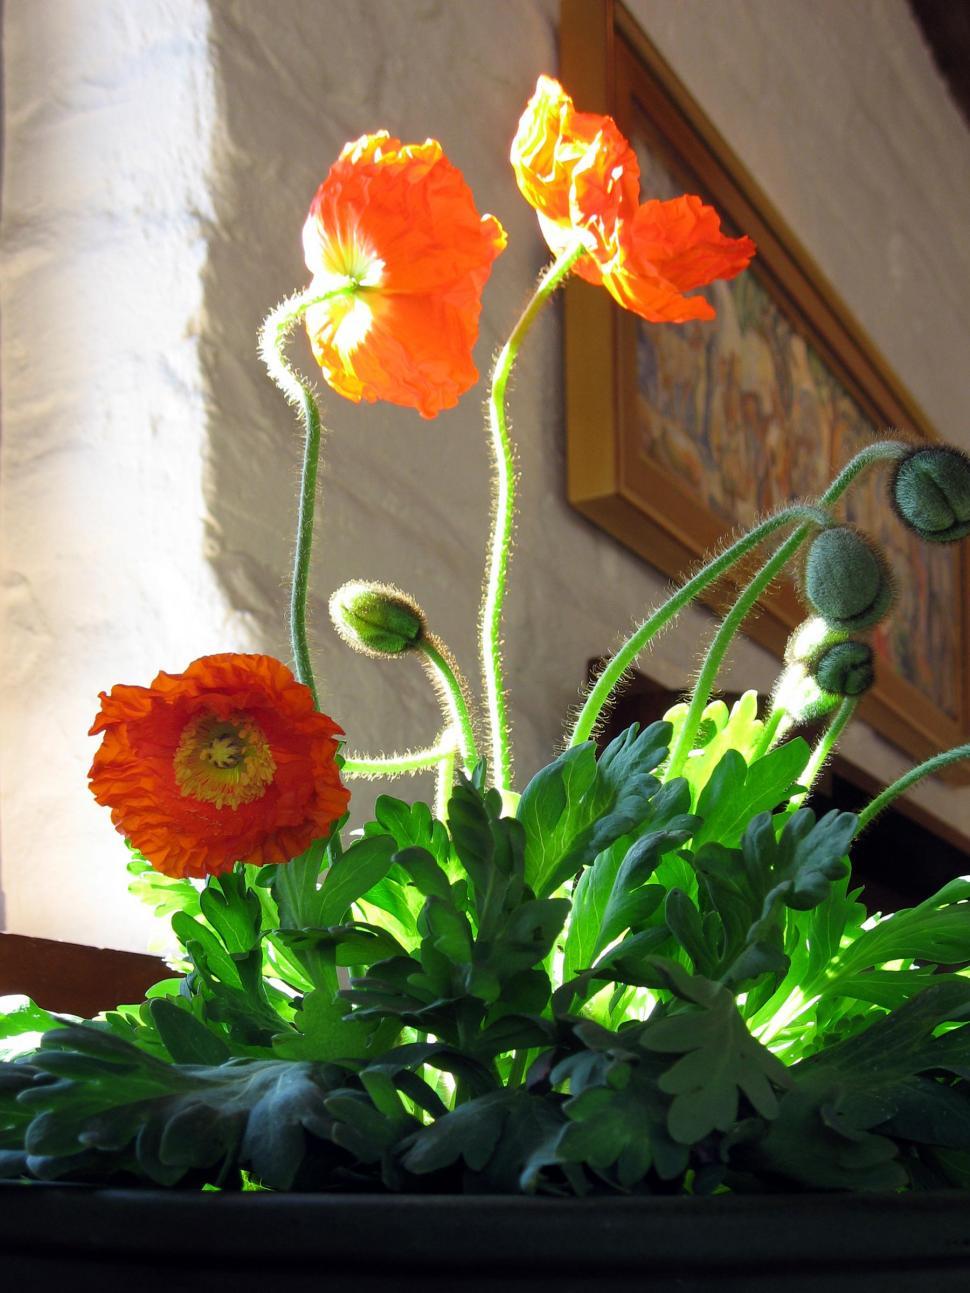 Free Image of Poppies Growing Indoors 